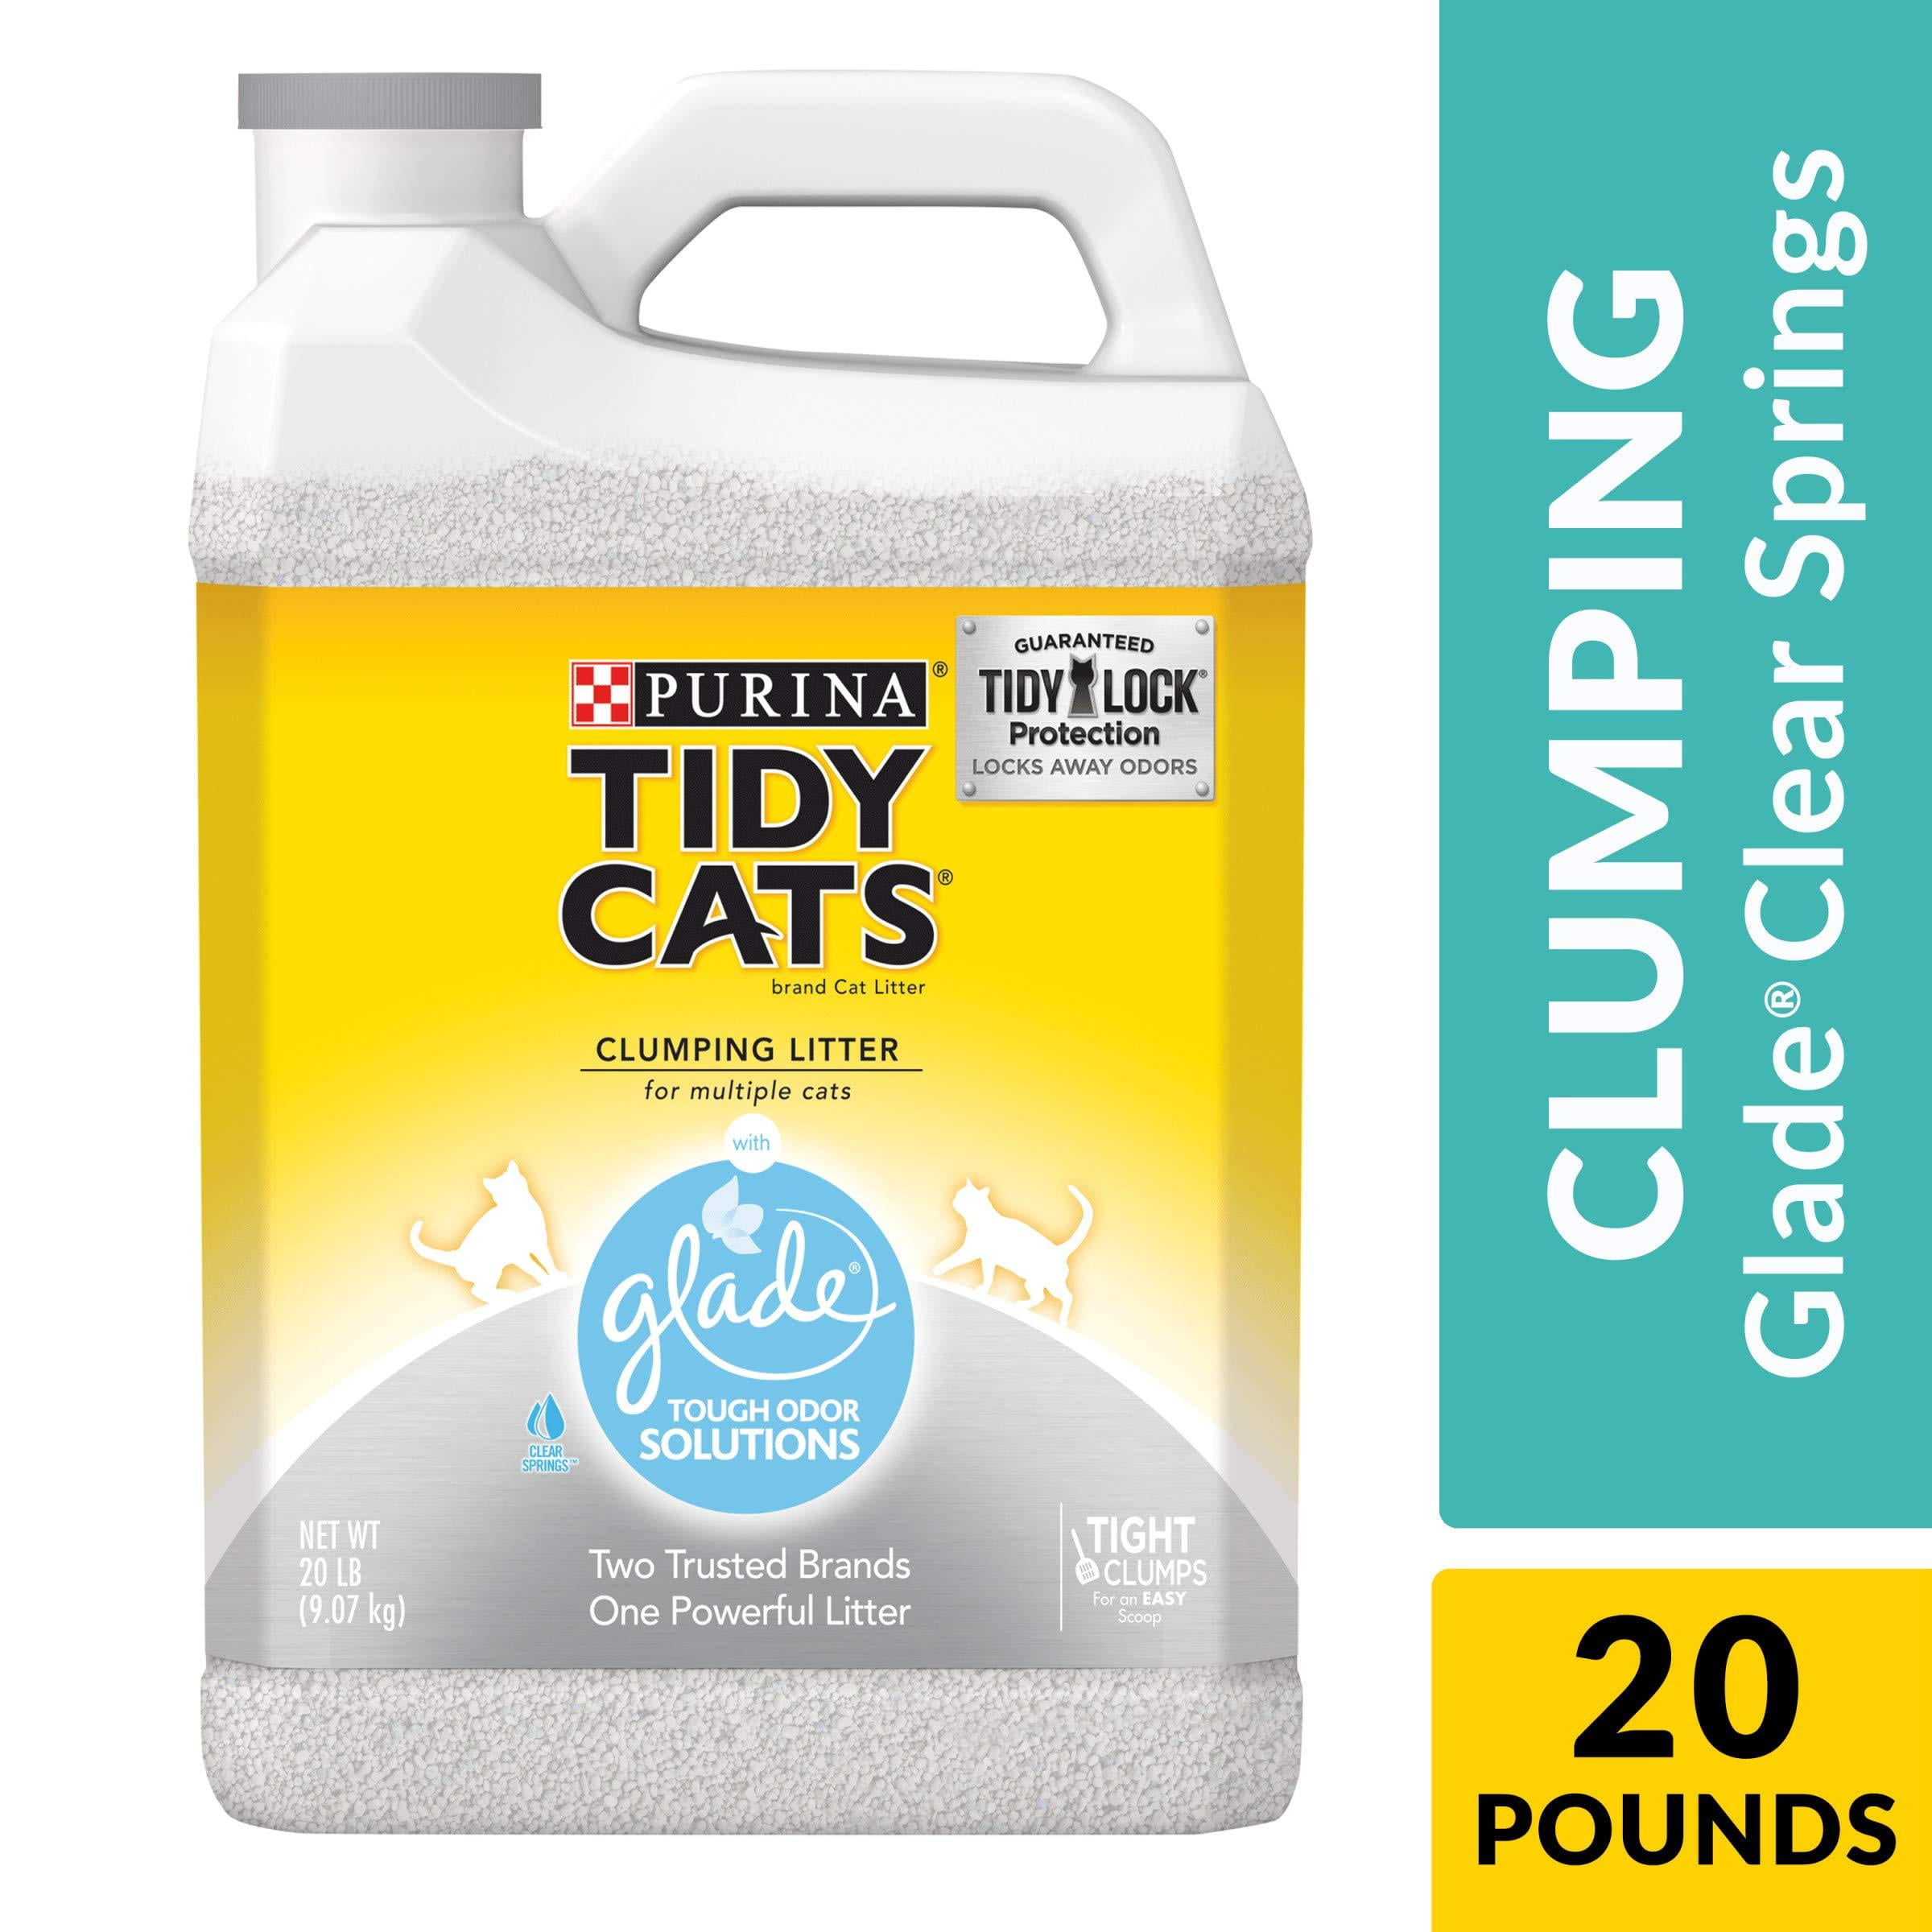 Purina Tidy Cats With Glade Tough Odor Solutions Clear Springs Clumping Cat Litt for sale online 